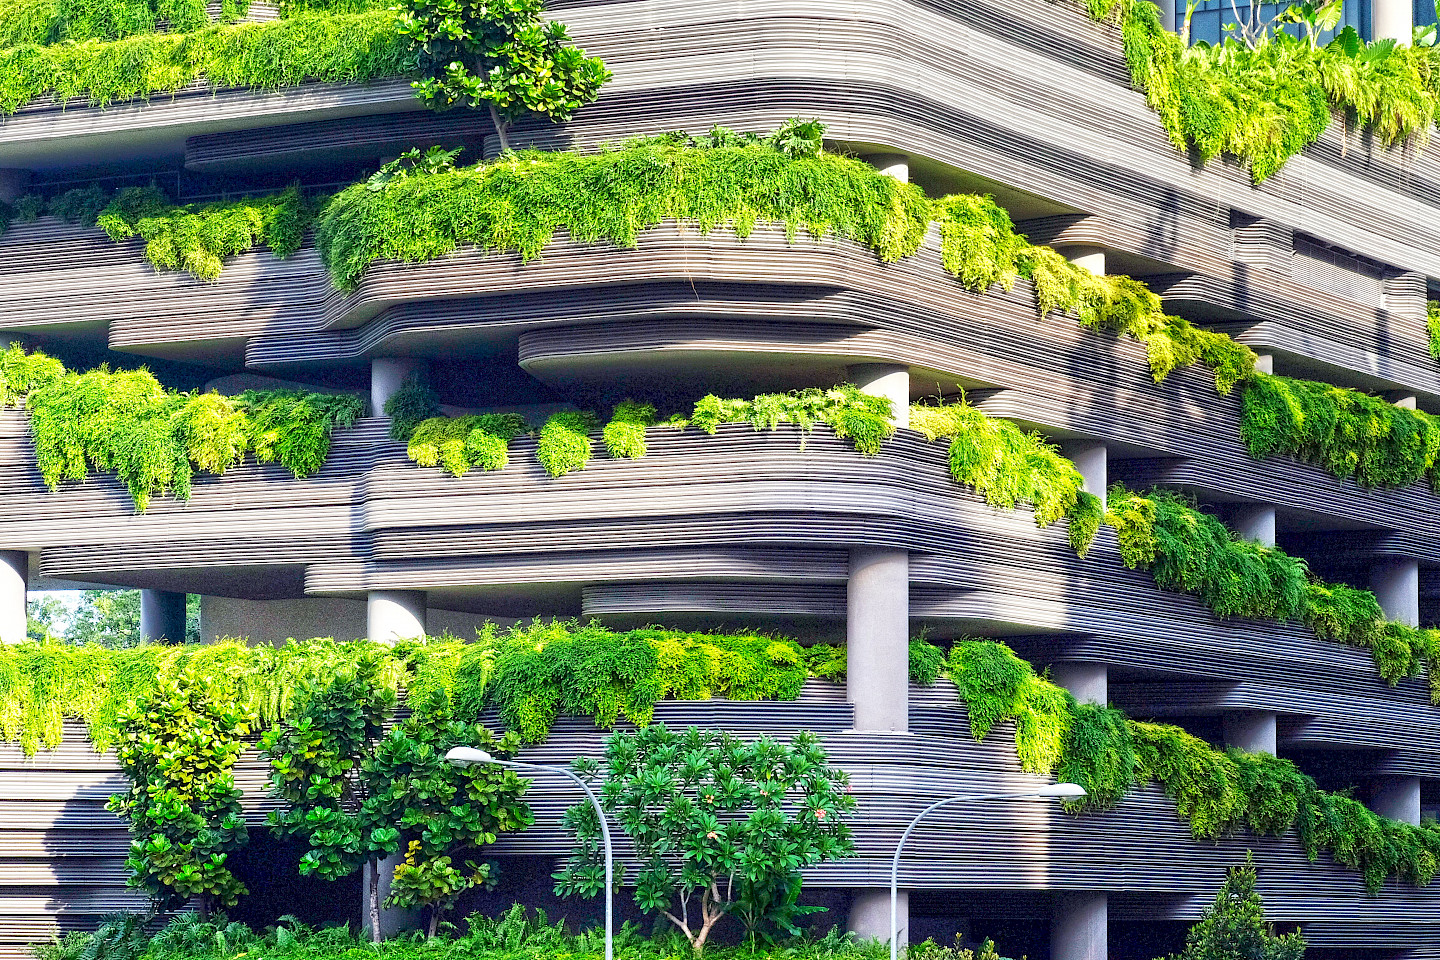 Green architecture can mitigate the effects of climate change.